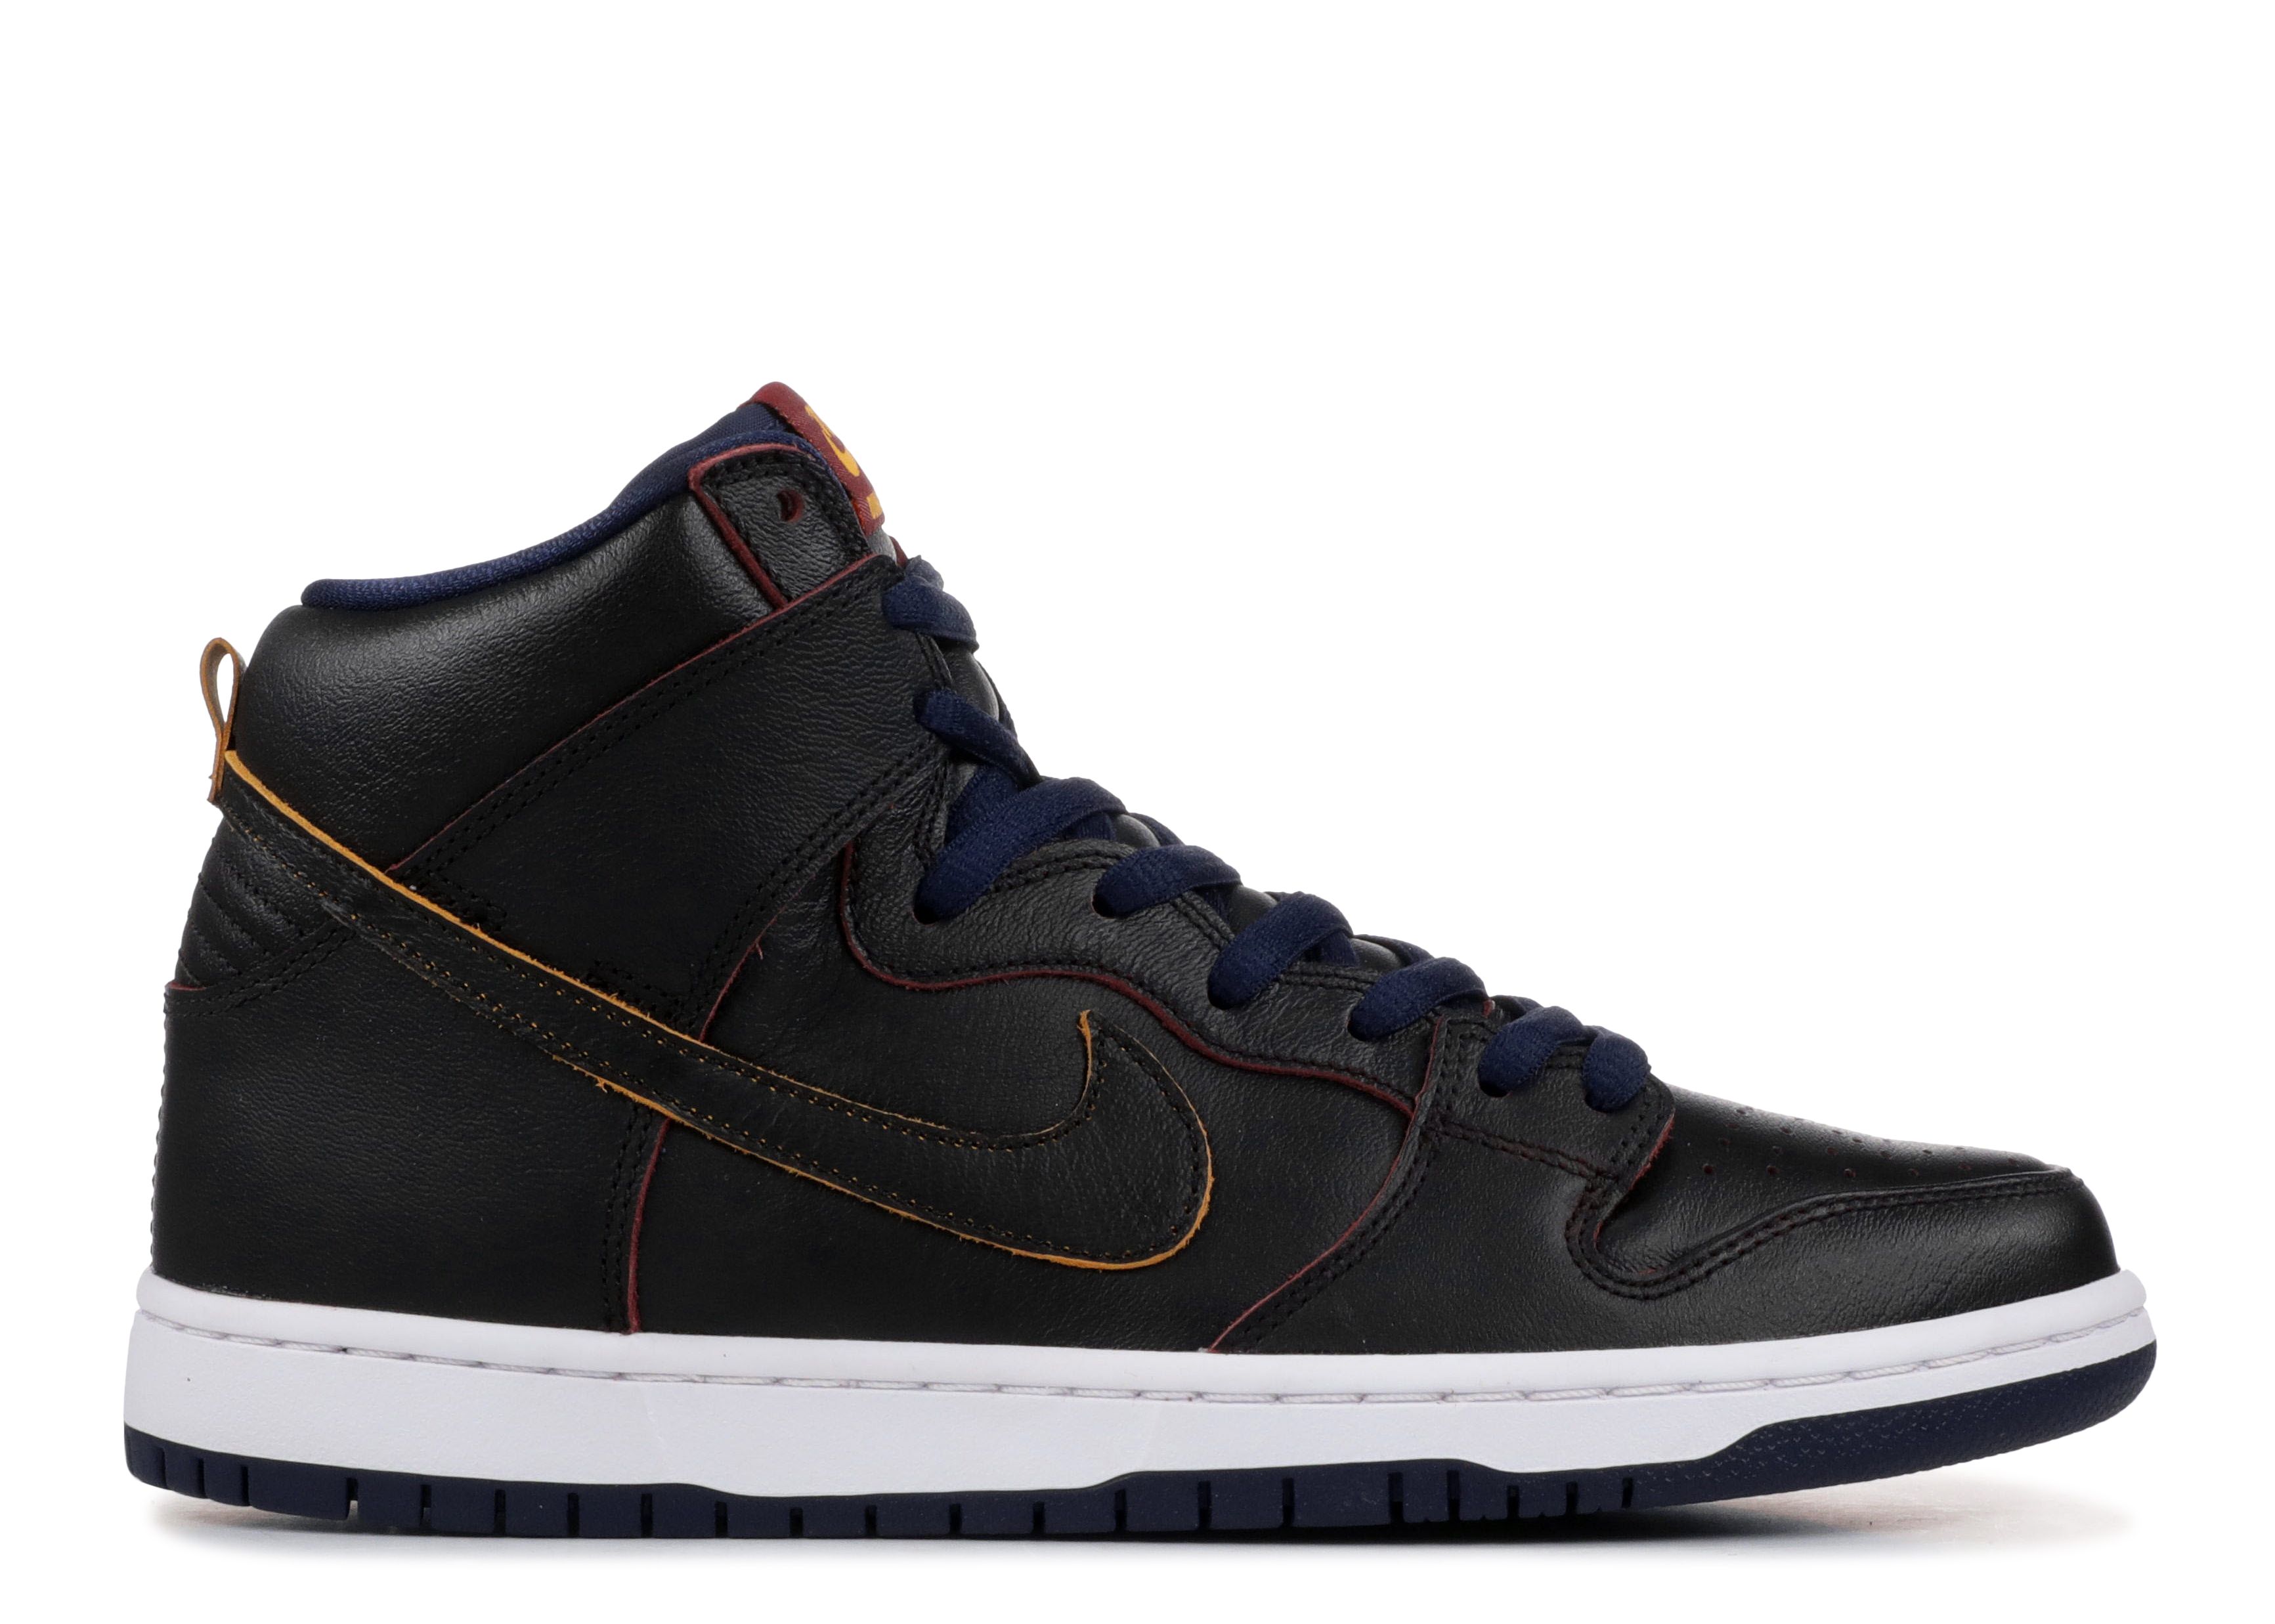 Check Out What Happens To The NBA x Nike SB Dunk High Cleveland